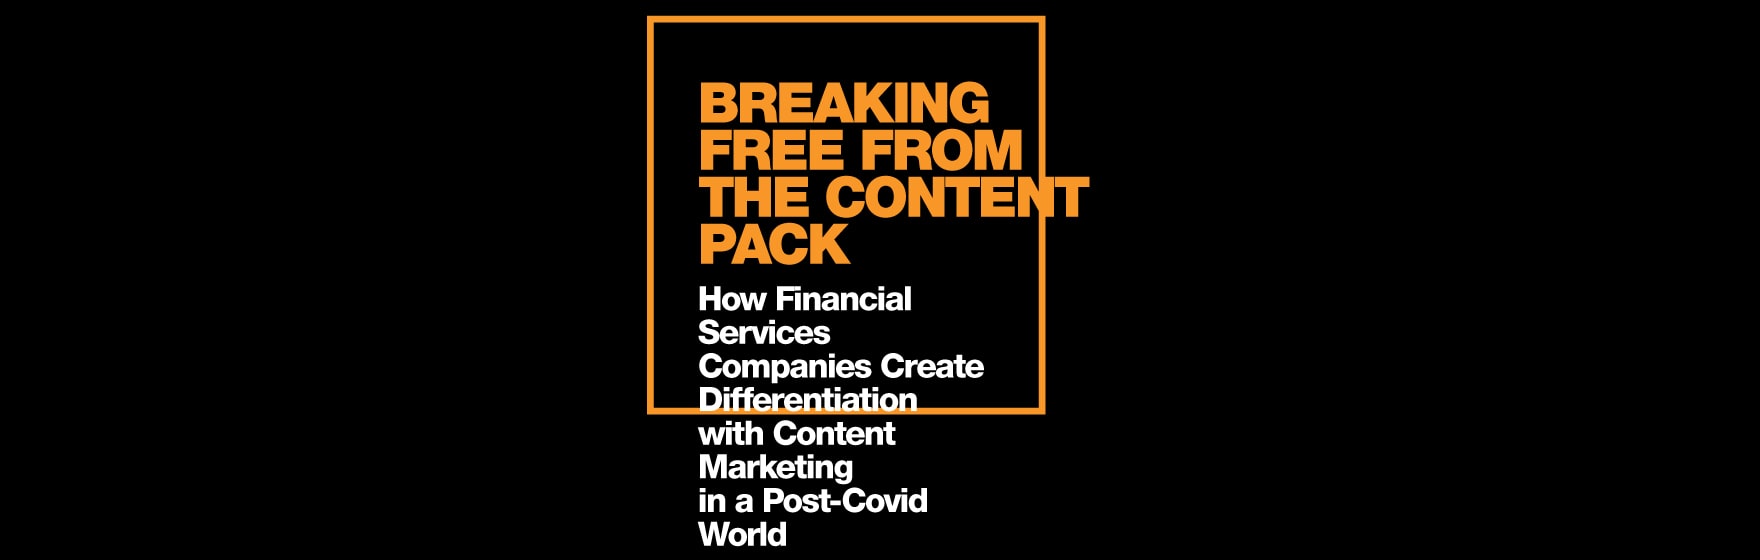 How Your Financial Services Content Marketing Can Break Free From the Pack [White Paper]